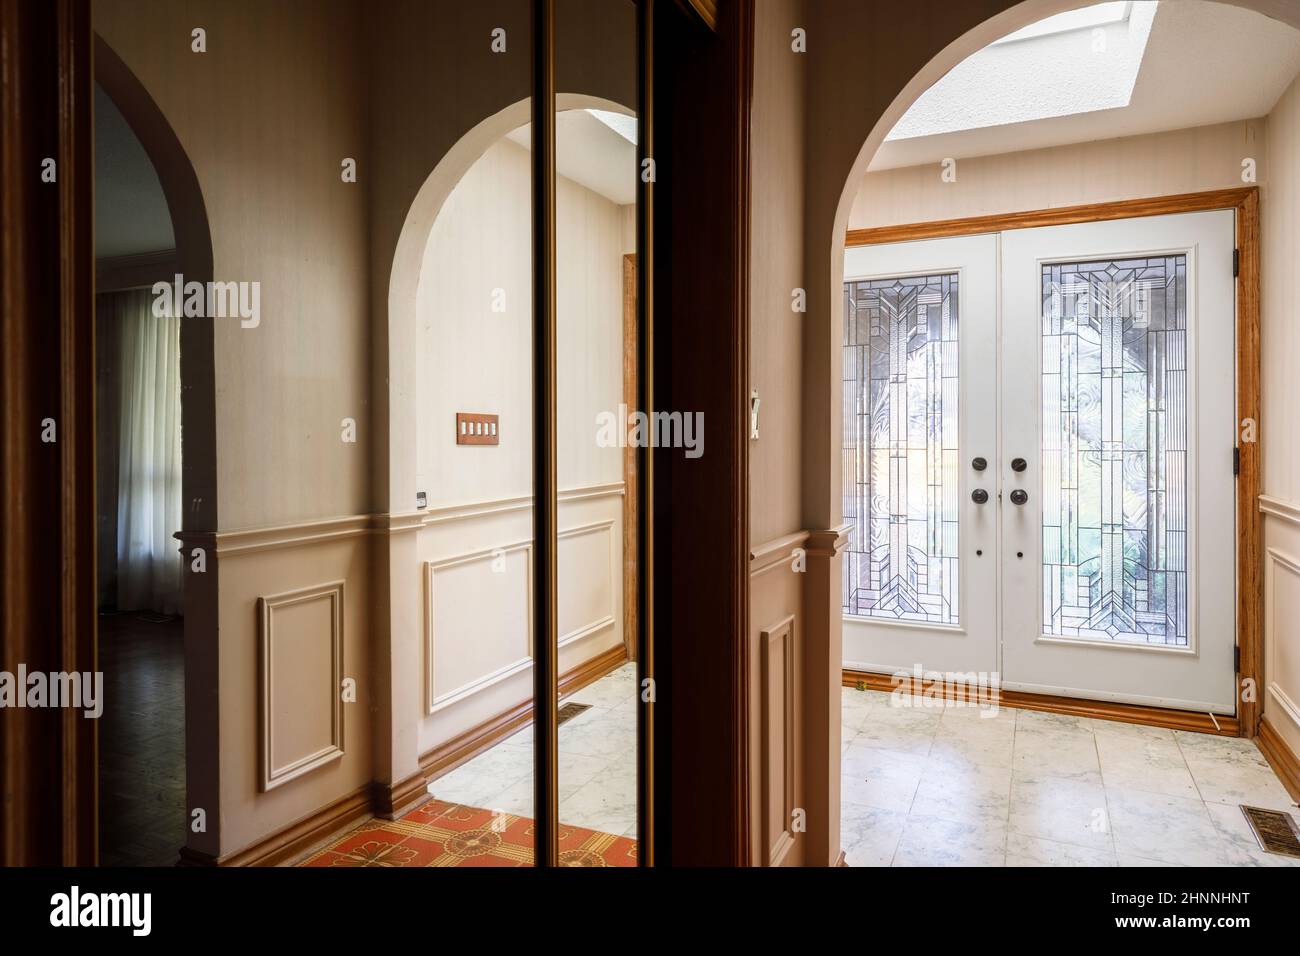 An entryway to a home, with a skylight above the door. Stock Photo